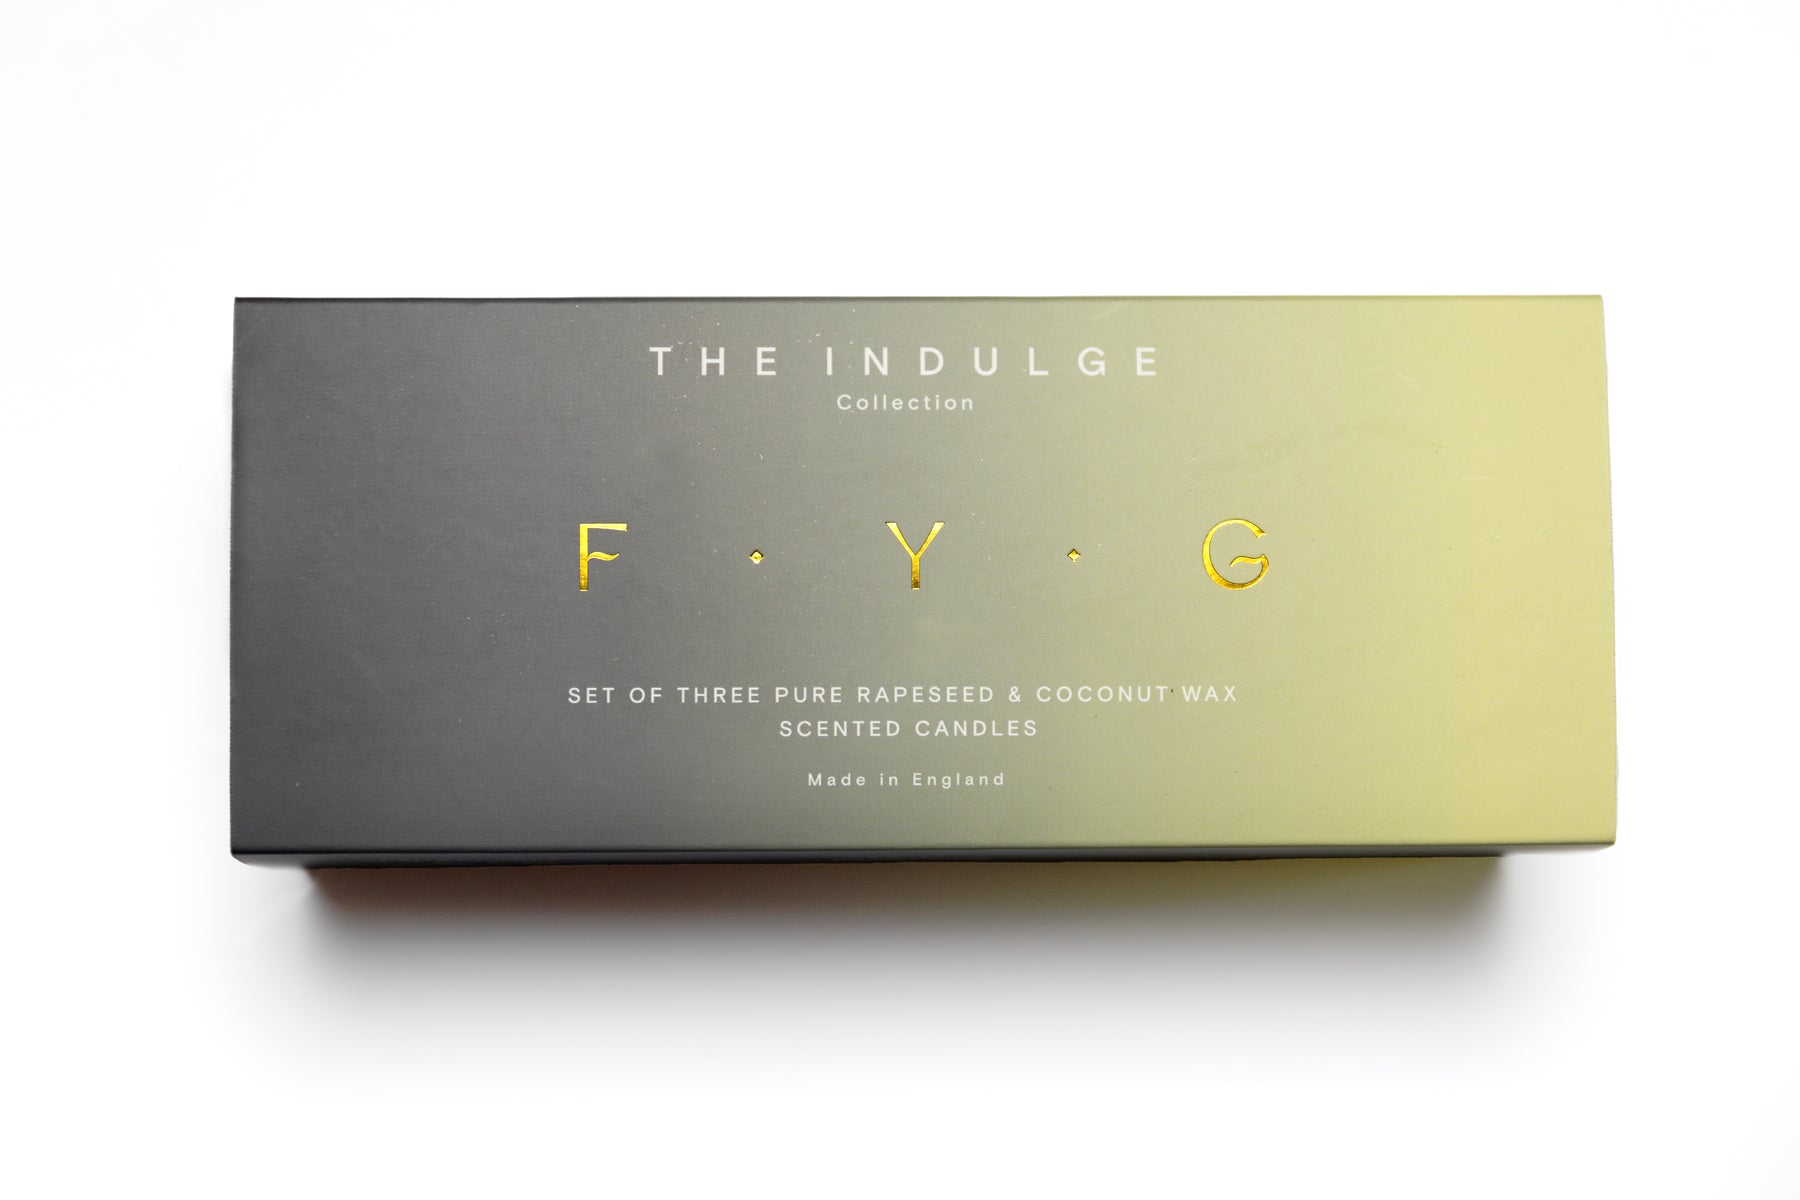 Indulge Collection Gift Set